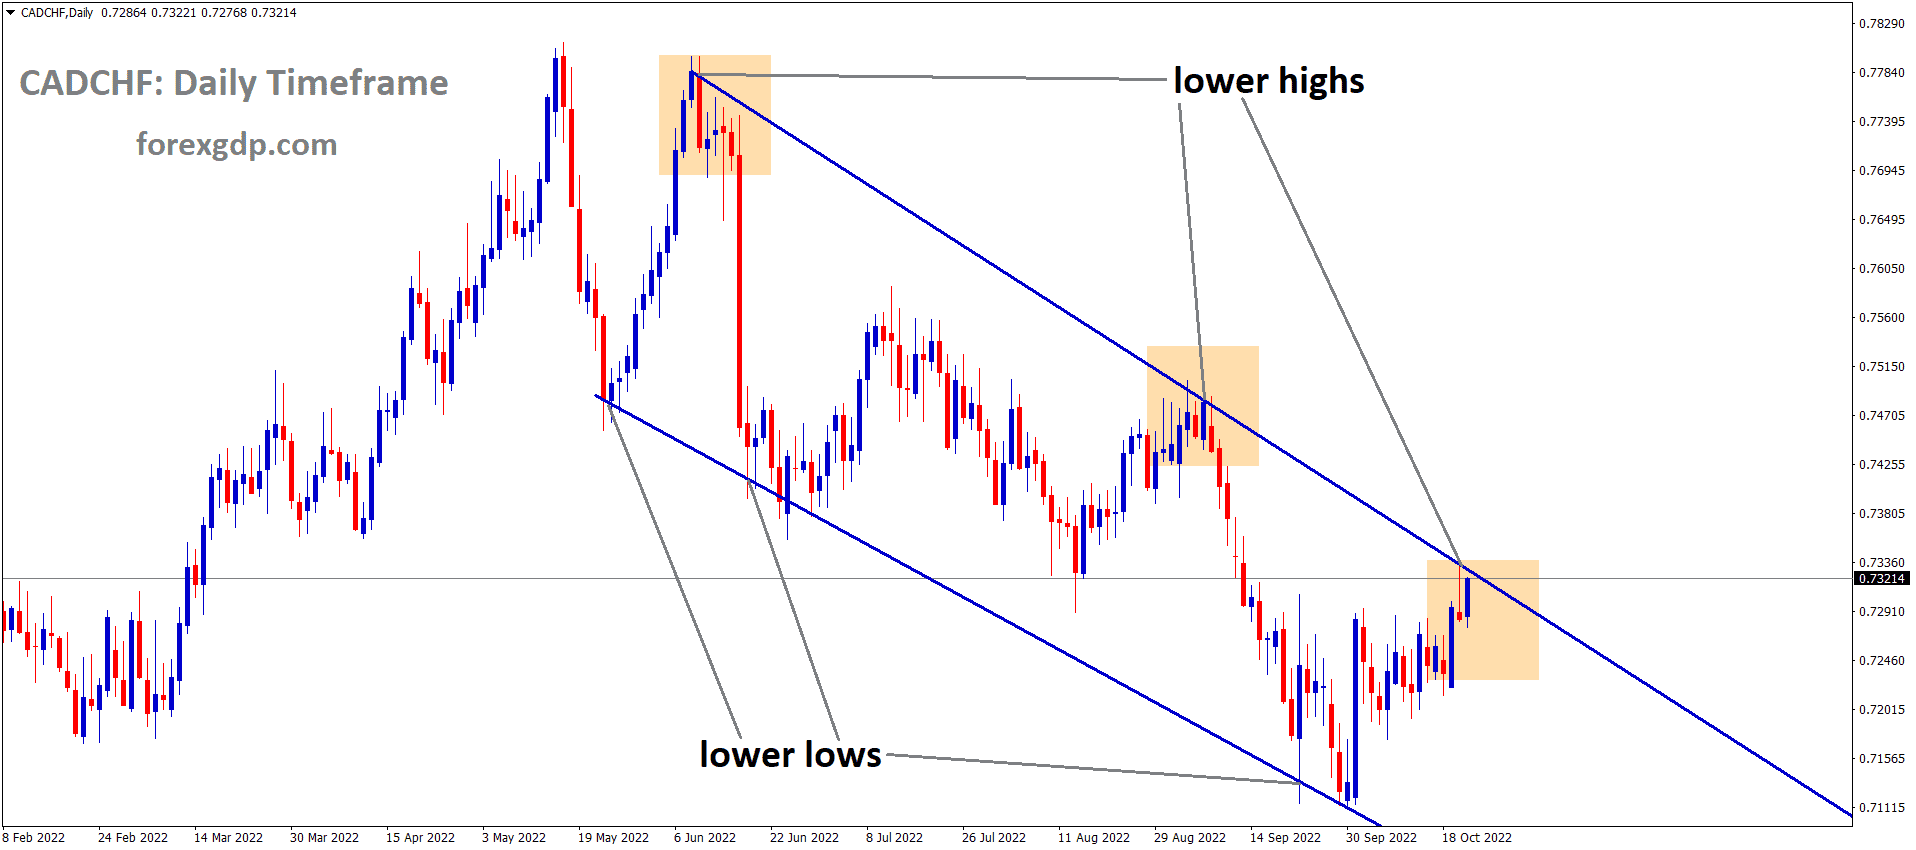 CADCHF is moving in the Descending channel and the market has reached the lower high area of the channel 2